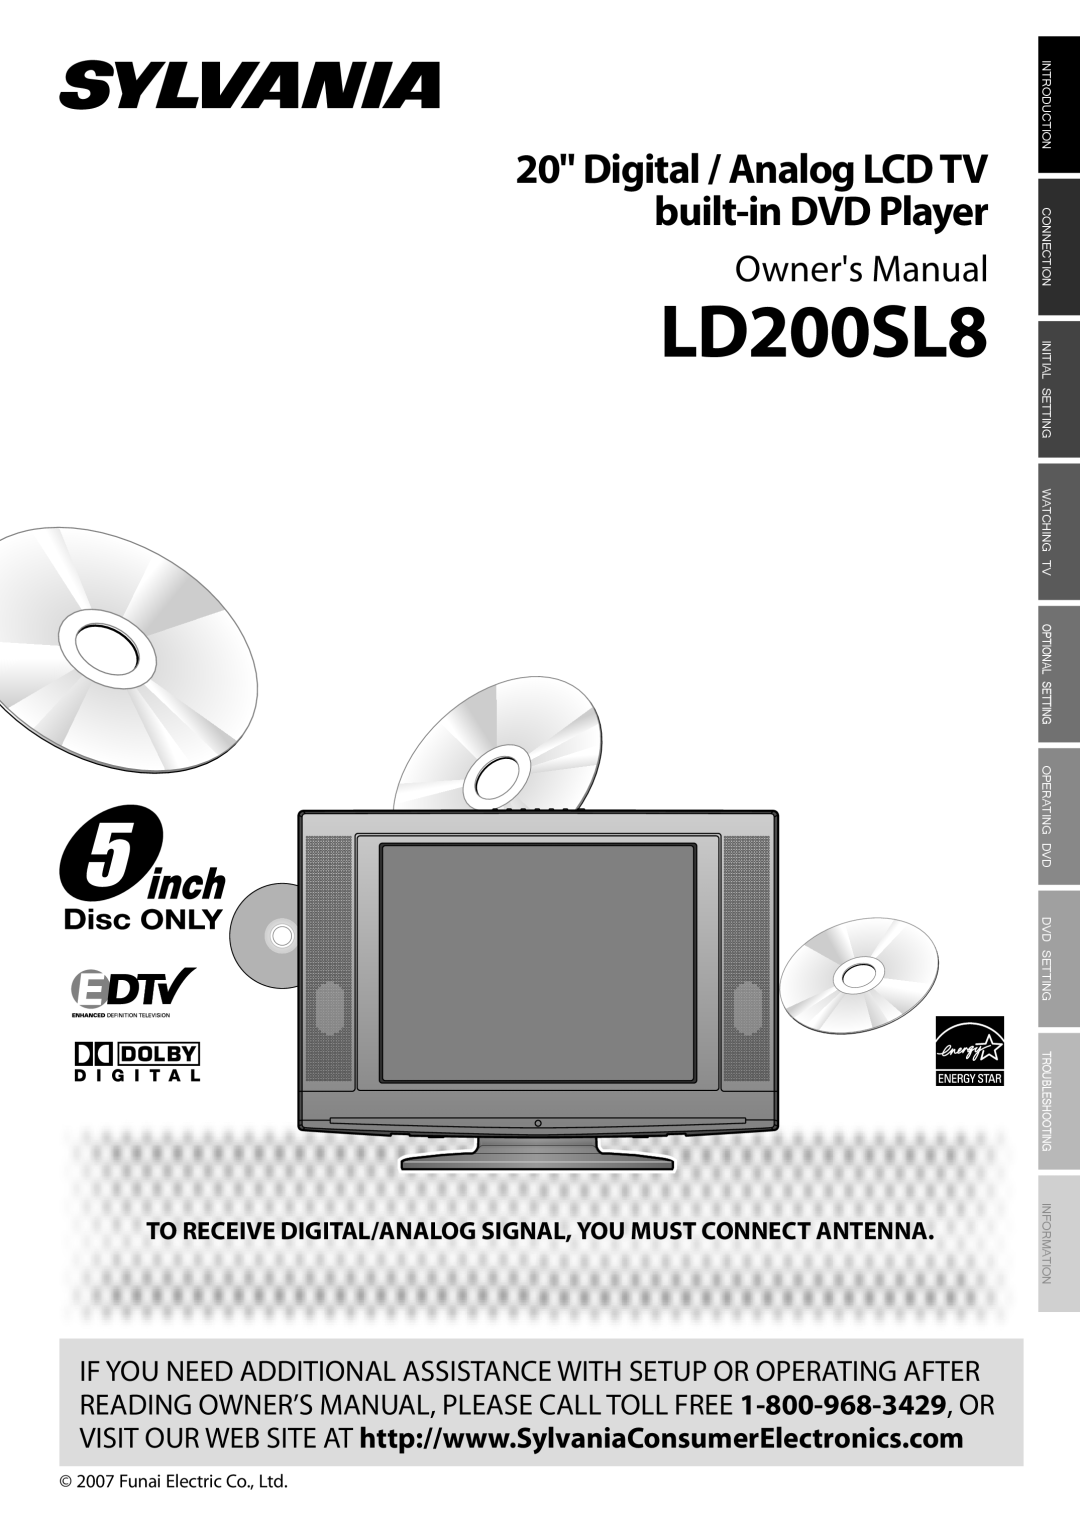 Sylvania LD200SL8 owner manual Owners Manual, To Receive Digital/Analog Signal, You Must Connect Antenna 